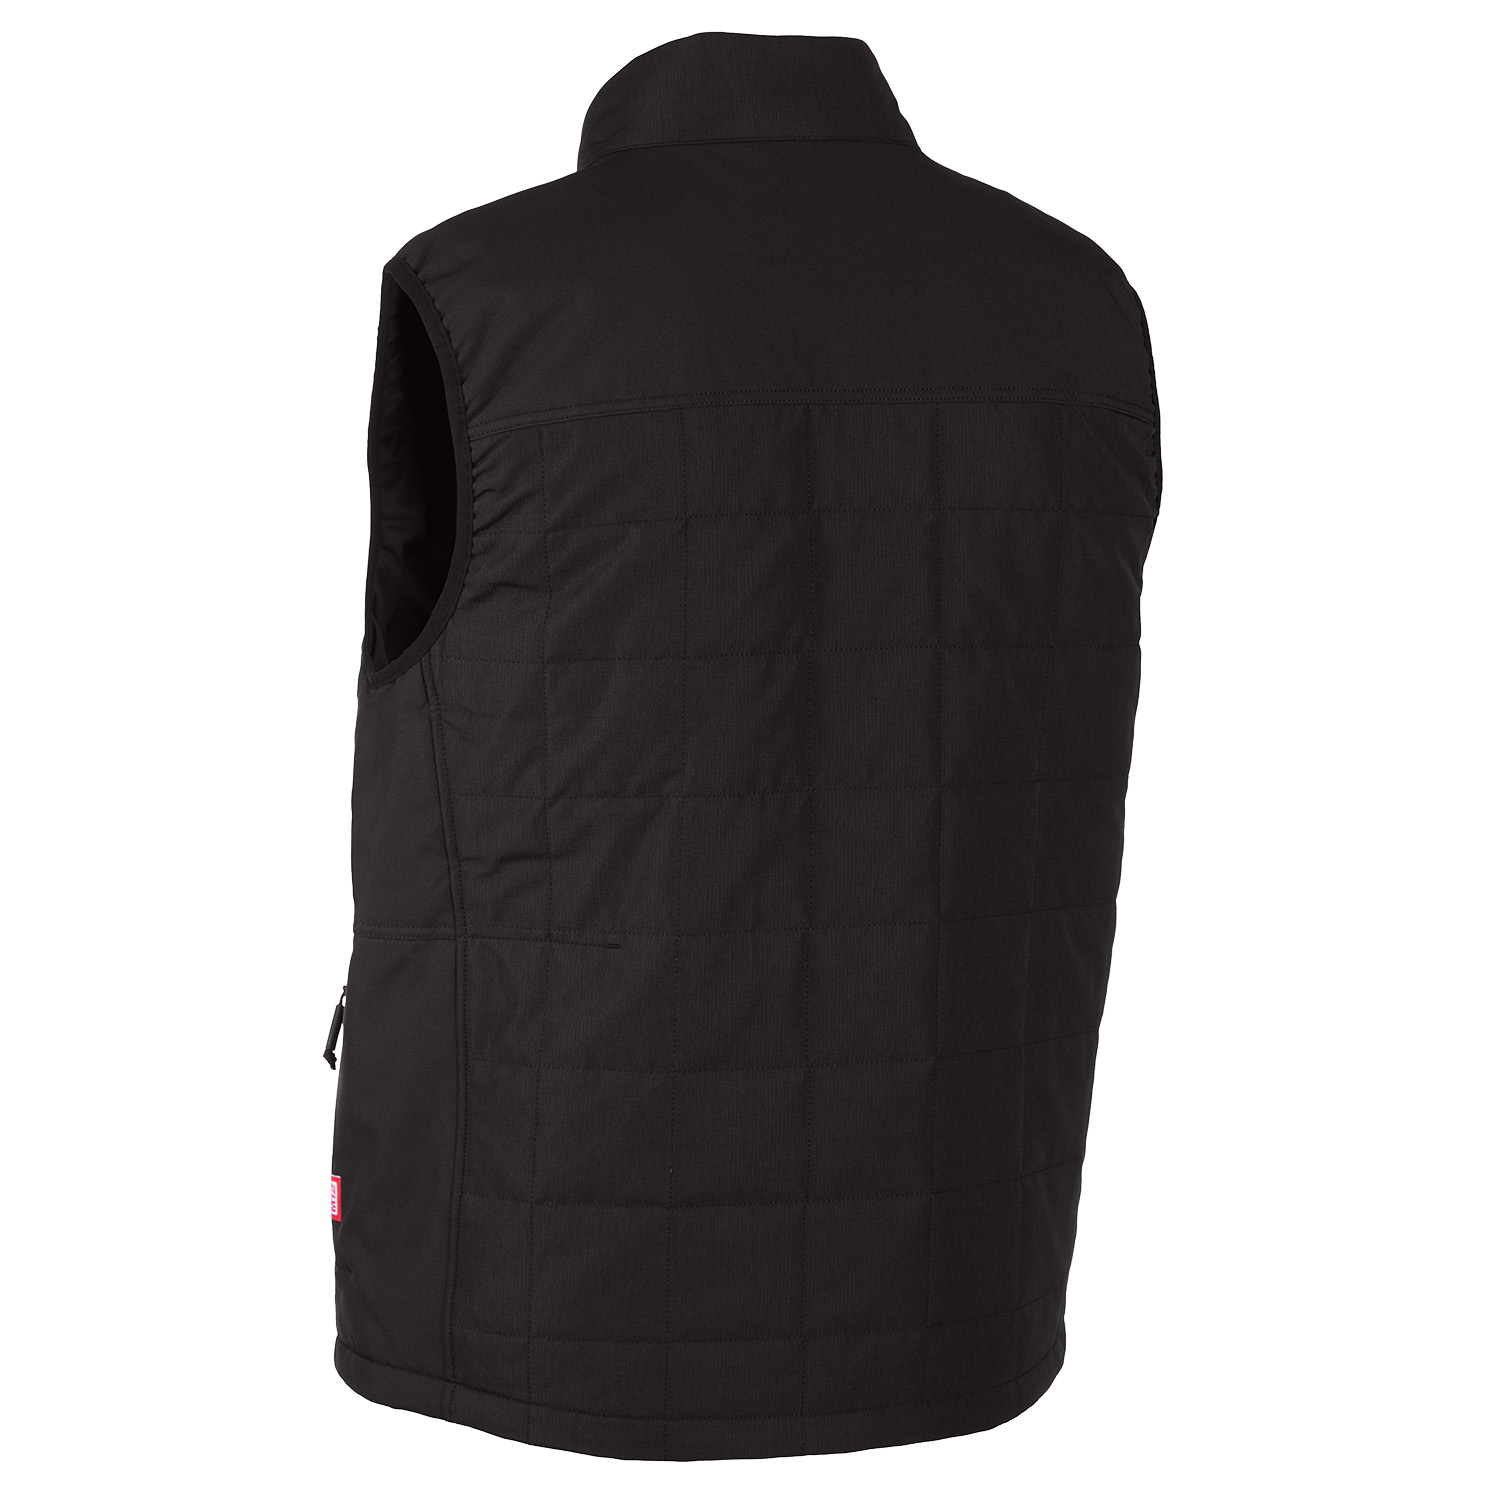 Milwaukee M12 AXIS Heated Vest from Columbia Safety